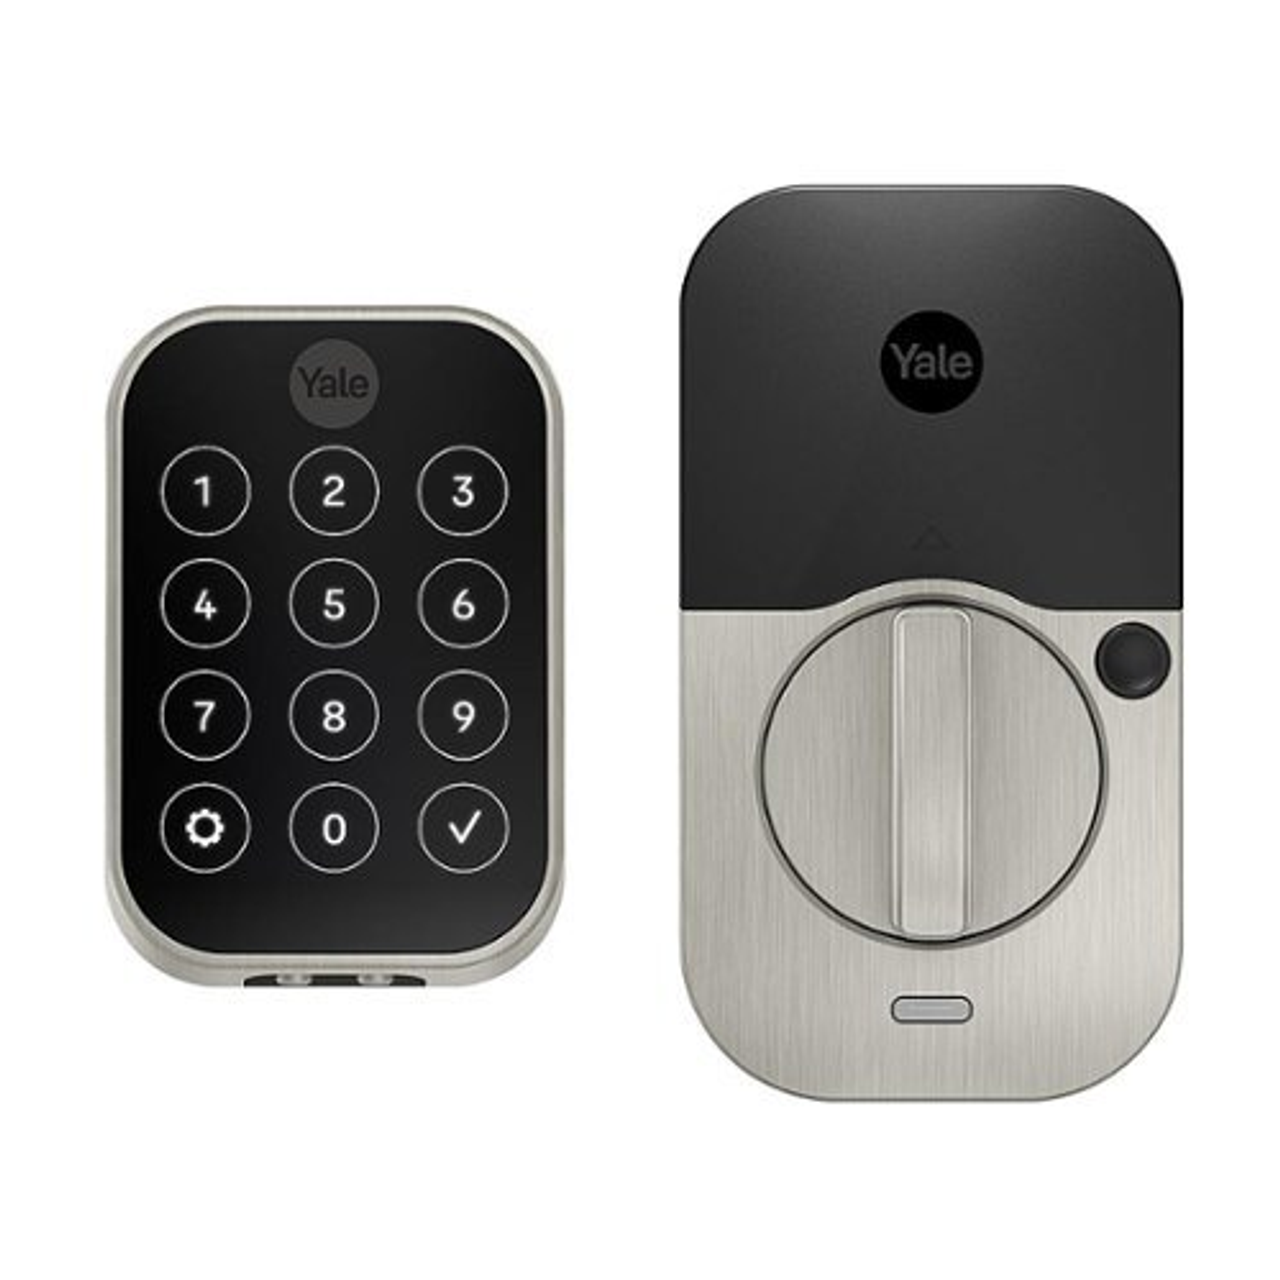 Yale - Assure Lock 2 Plus Smart Lock Bluetooth Replacement with Home Keys, Electronic Guest Keys, and Keypad Access - Satin Nickel